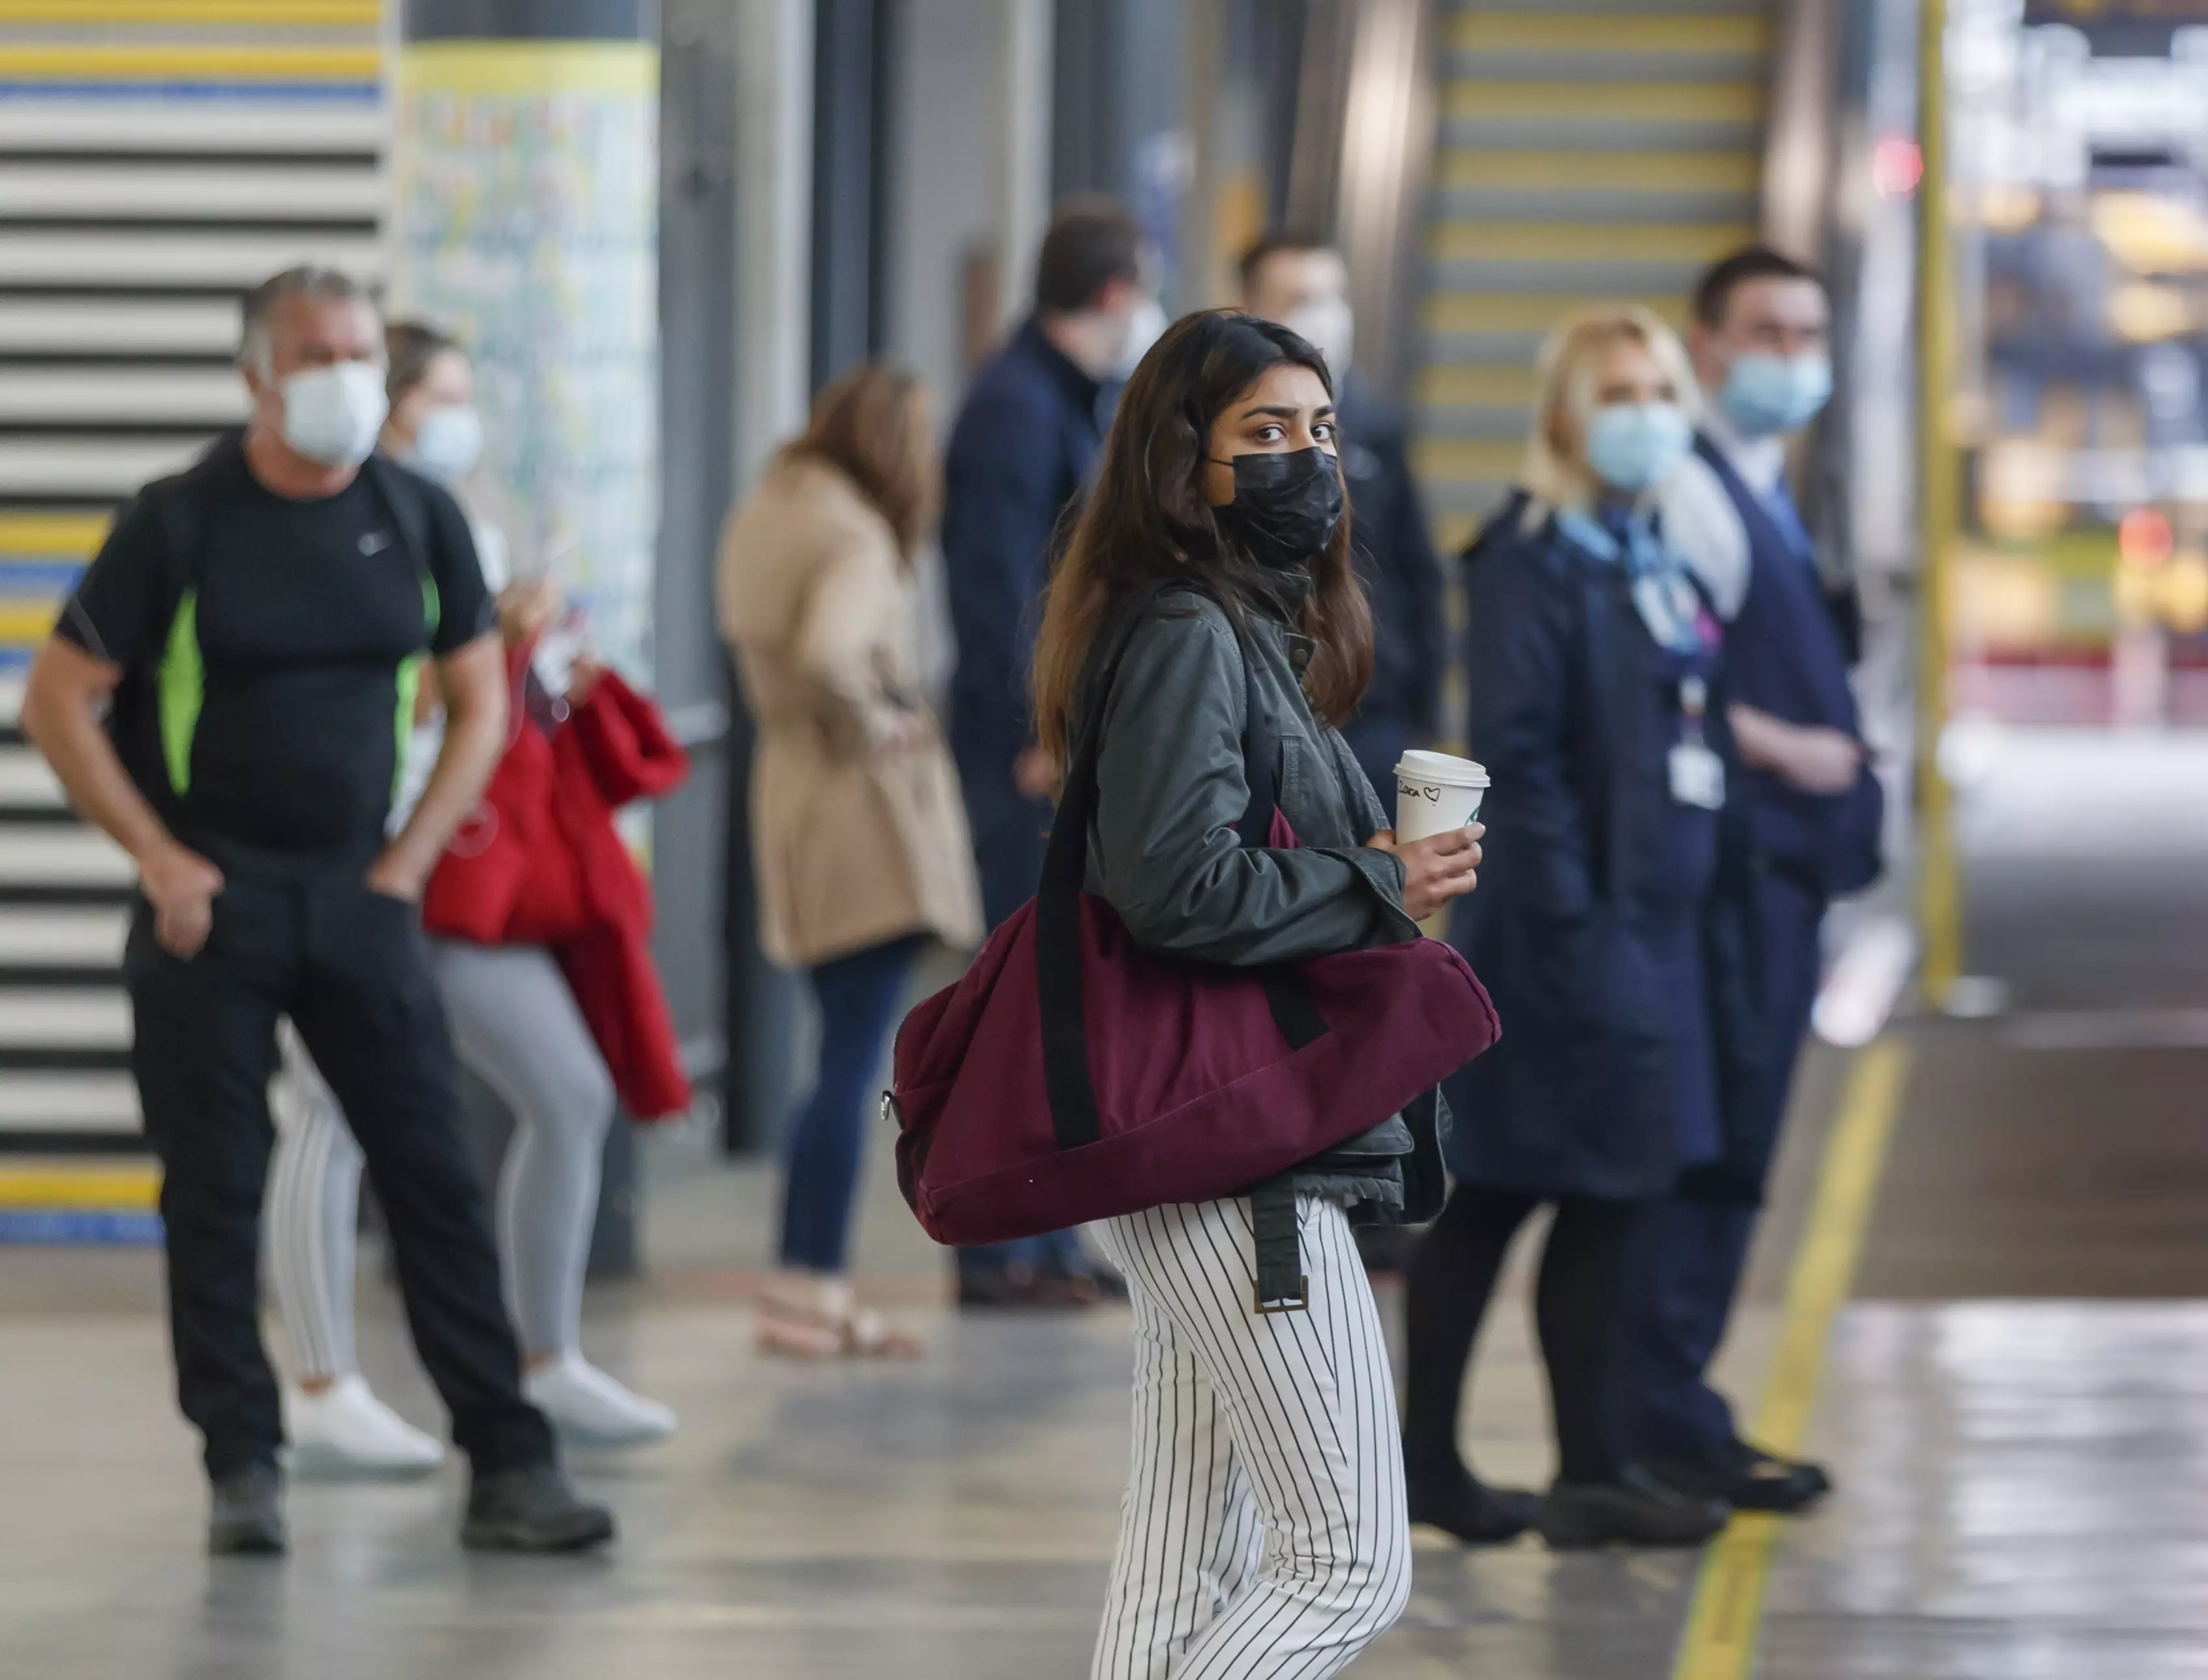 From today, it's compulsory to wear face masks on public transport (